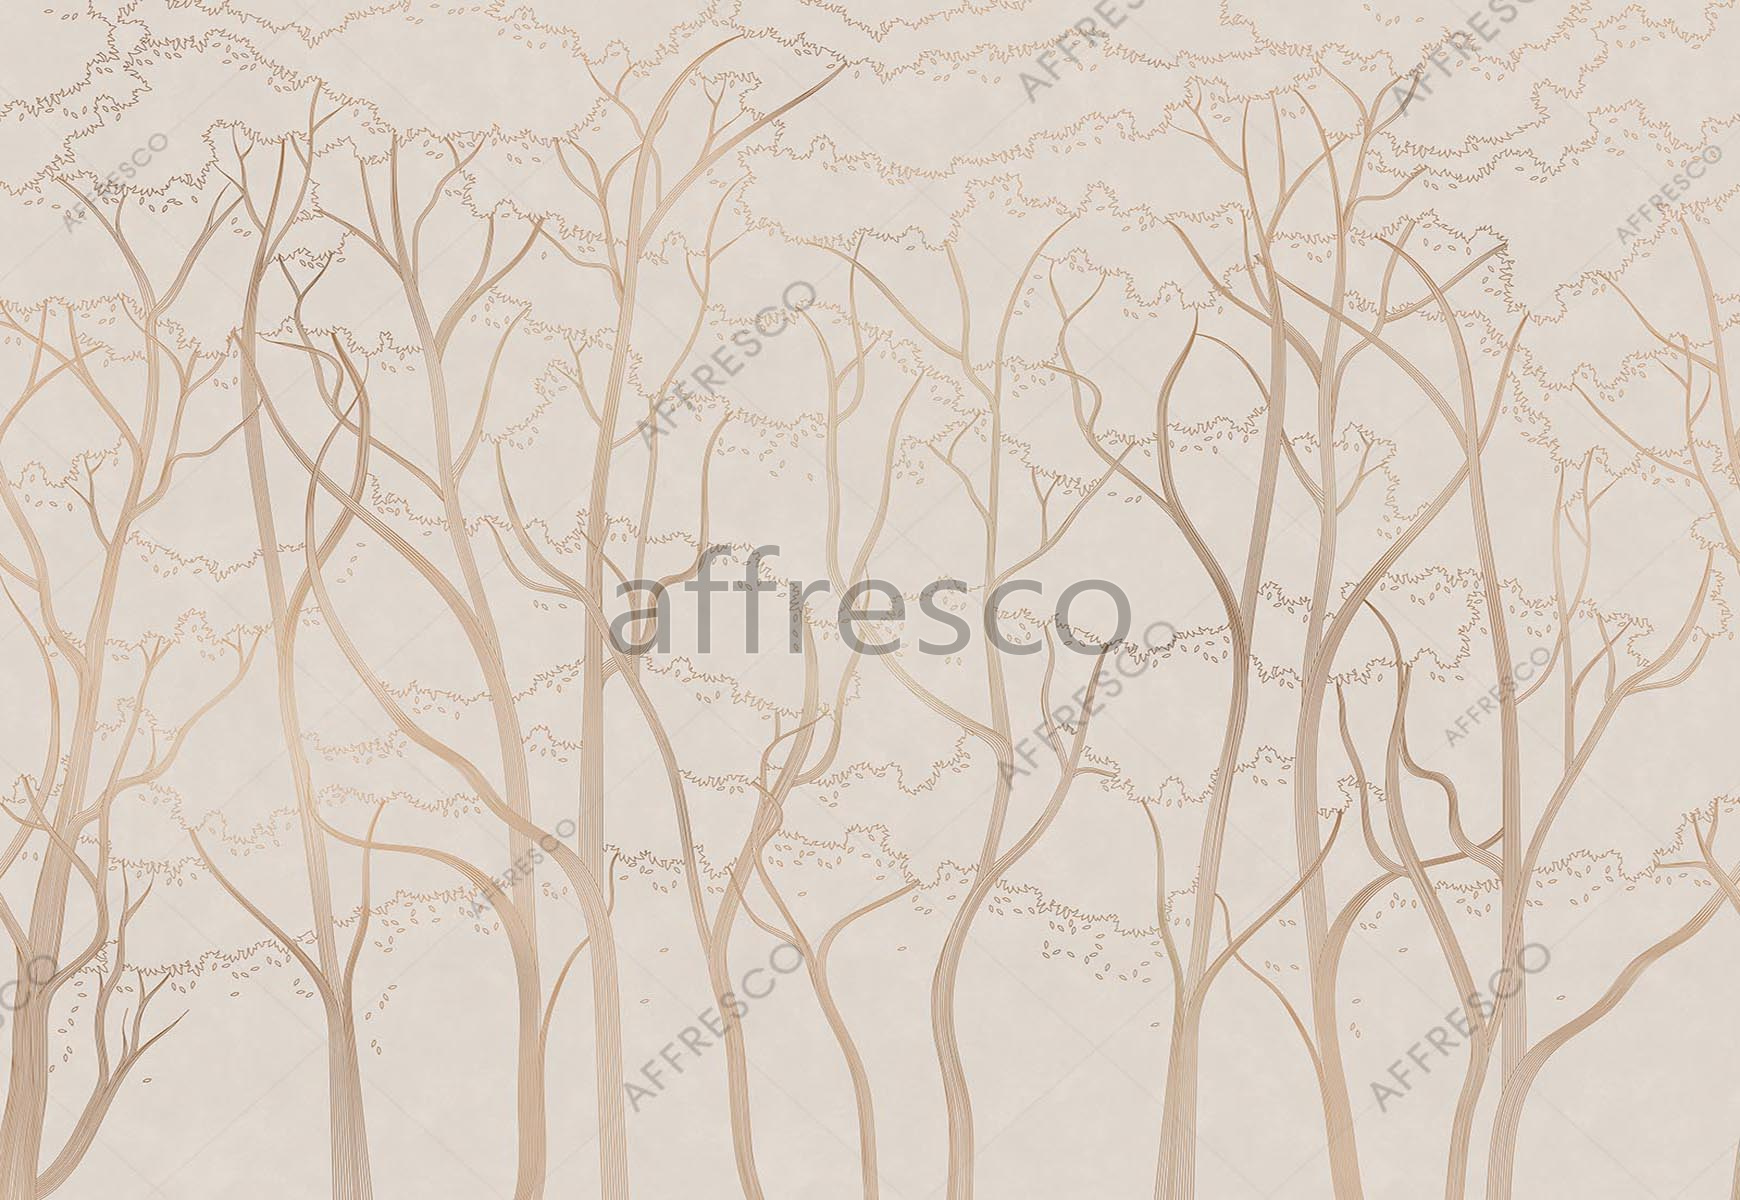 ID139163 | Forest | mysterious forest | Affresco Factory